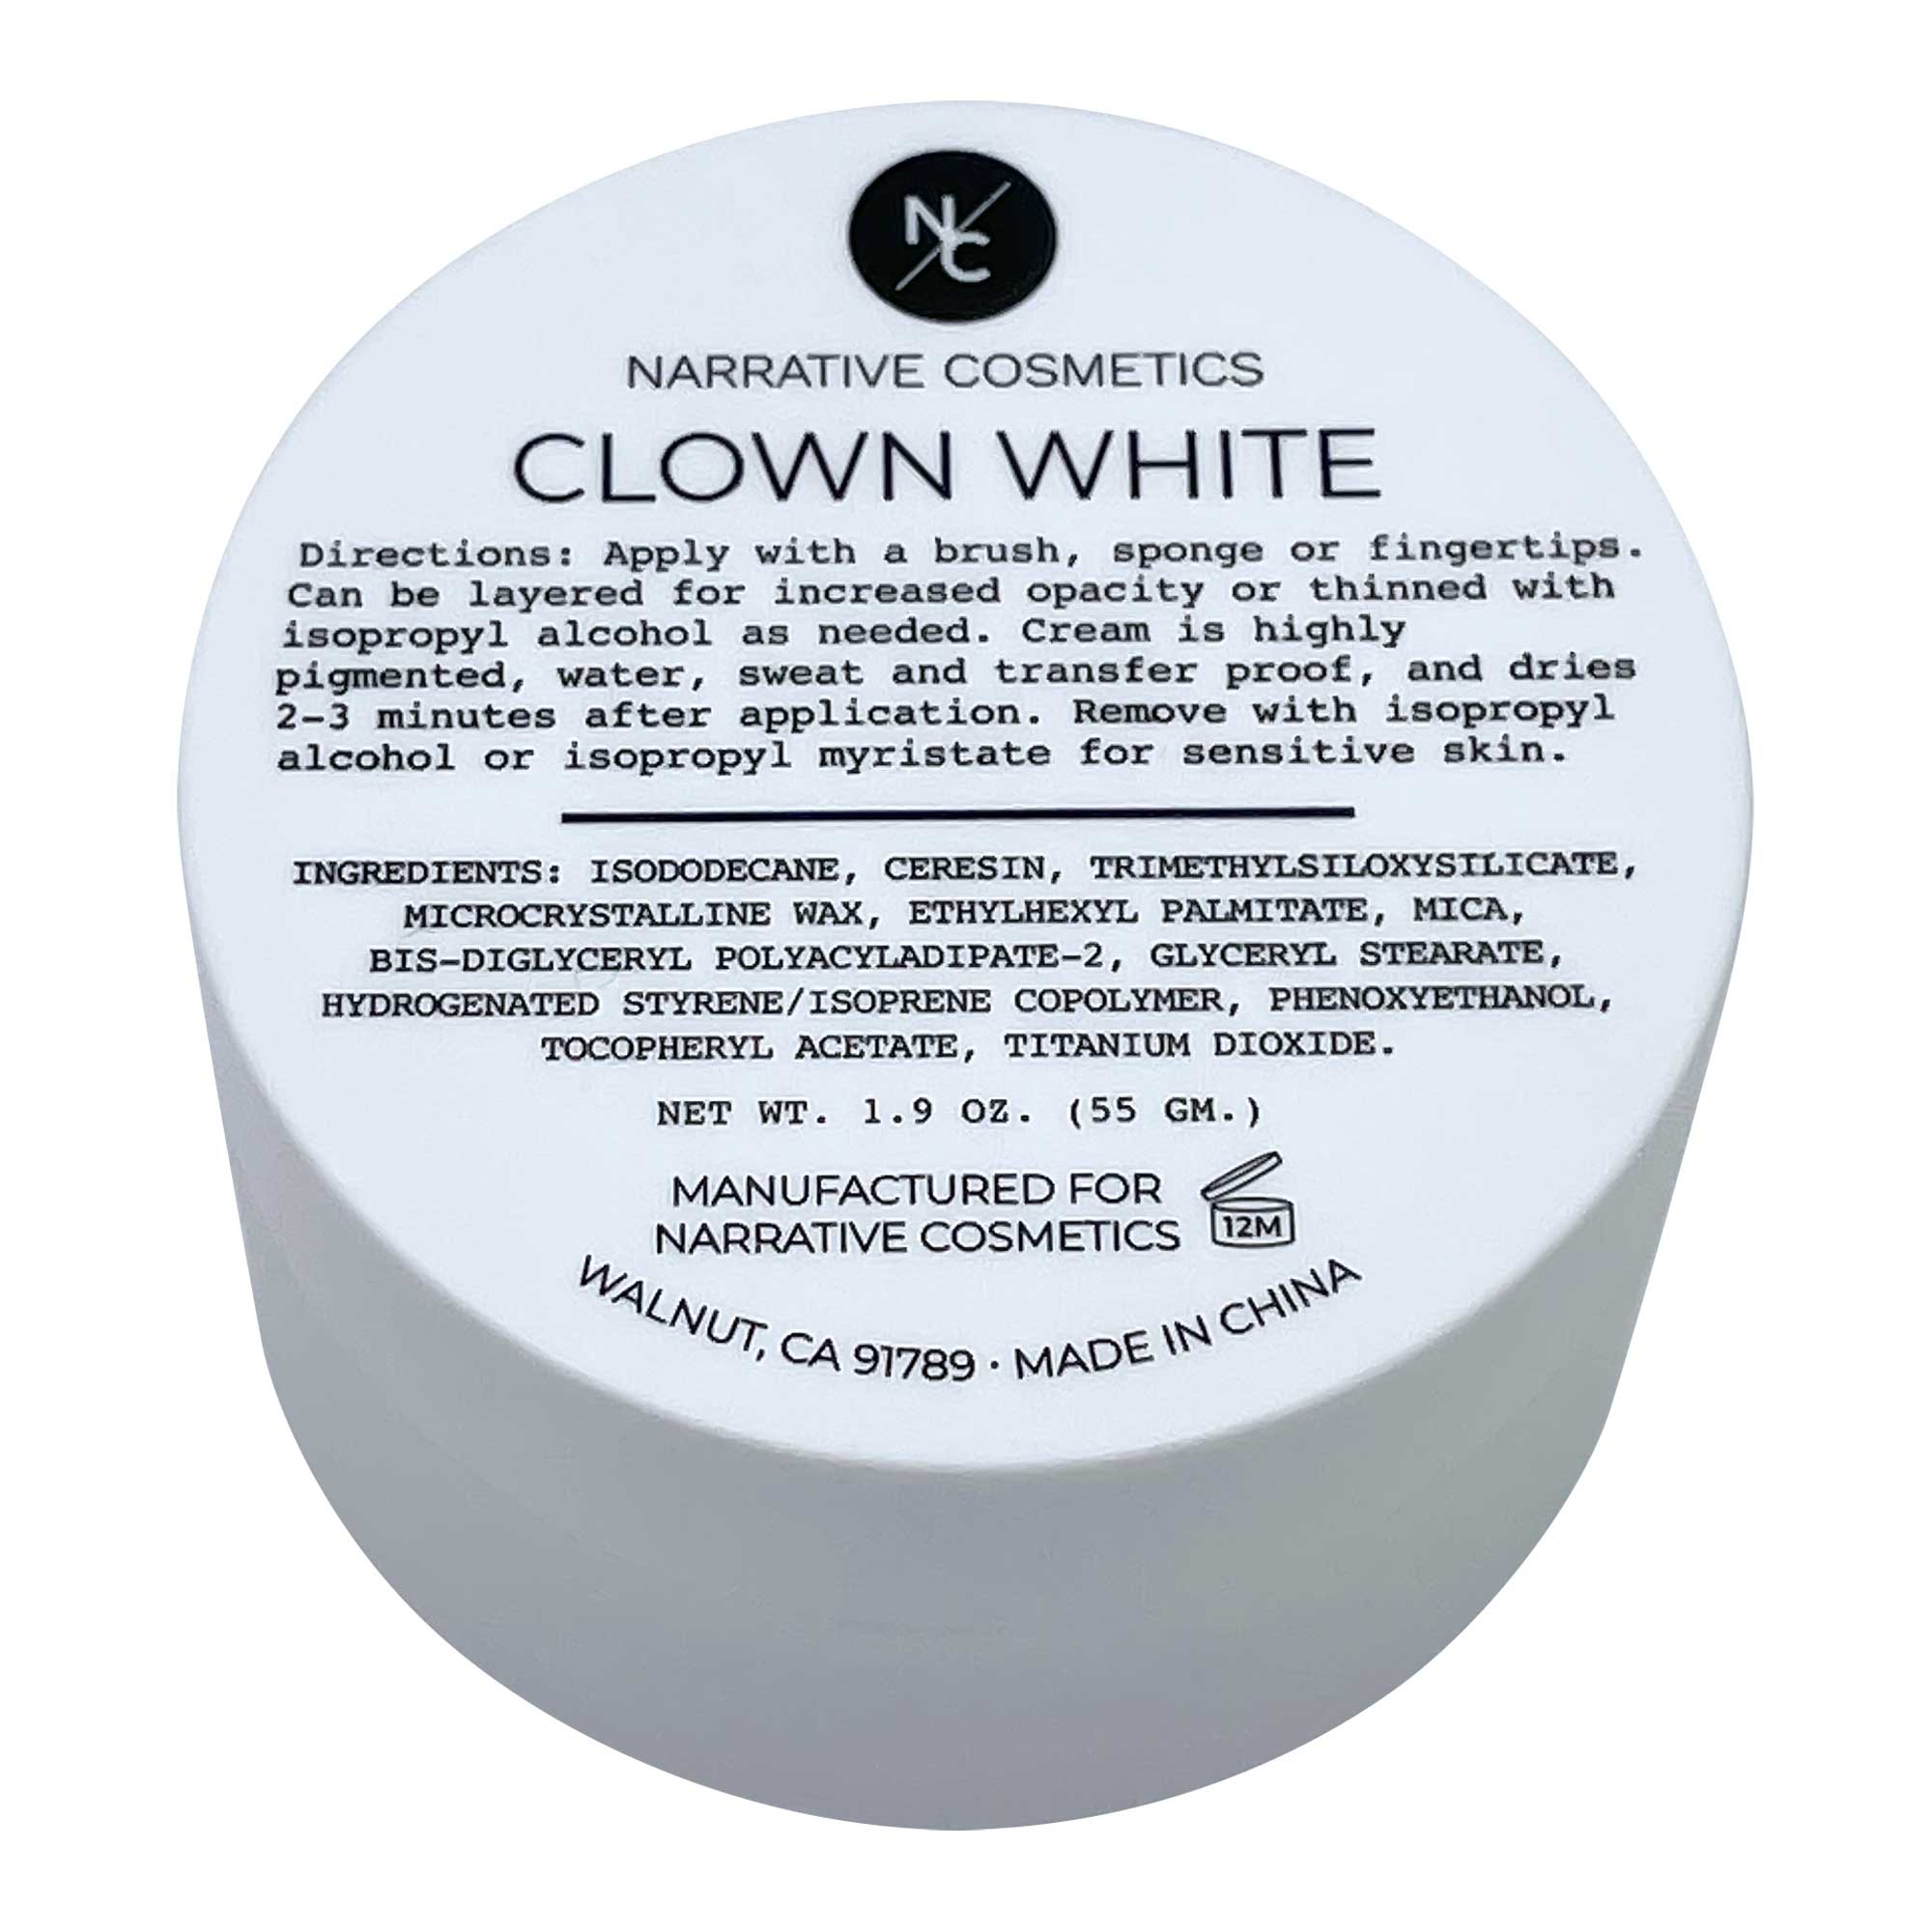 Mosaiz Clown White Makeup Cream, White Foundation Cream for Halloween  Costumes and Special Effects, White Facepaint Makeup, 2.1 oz (60 gr),  Including